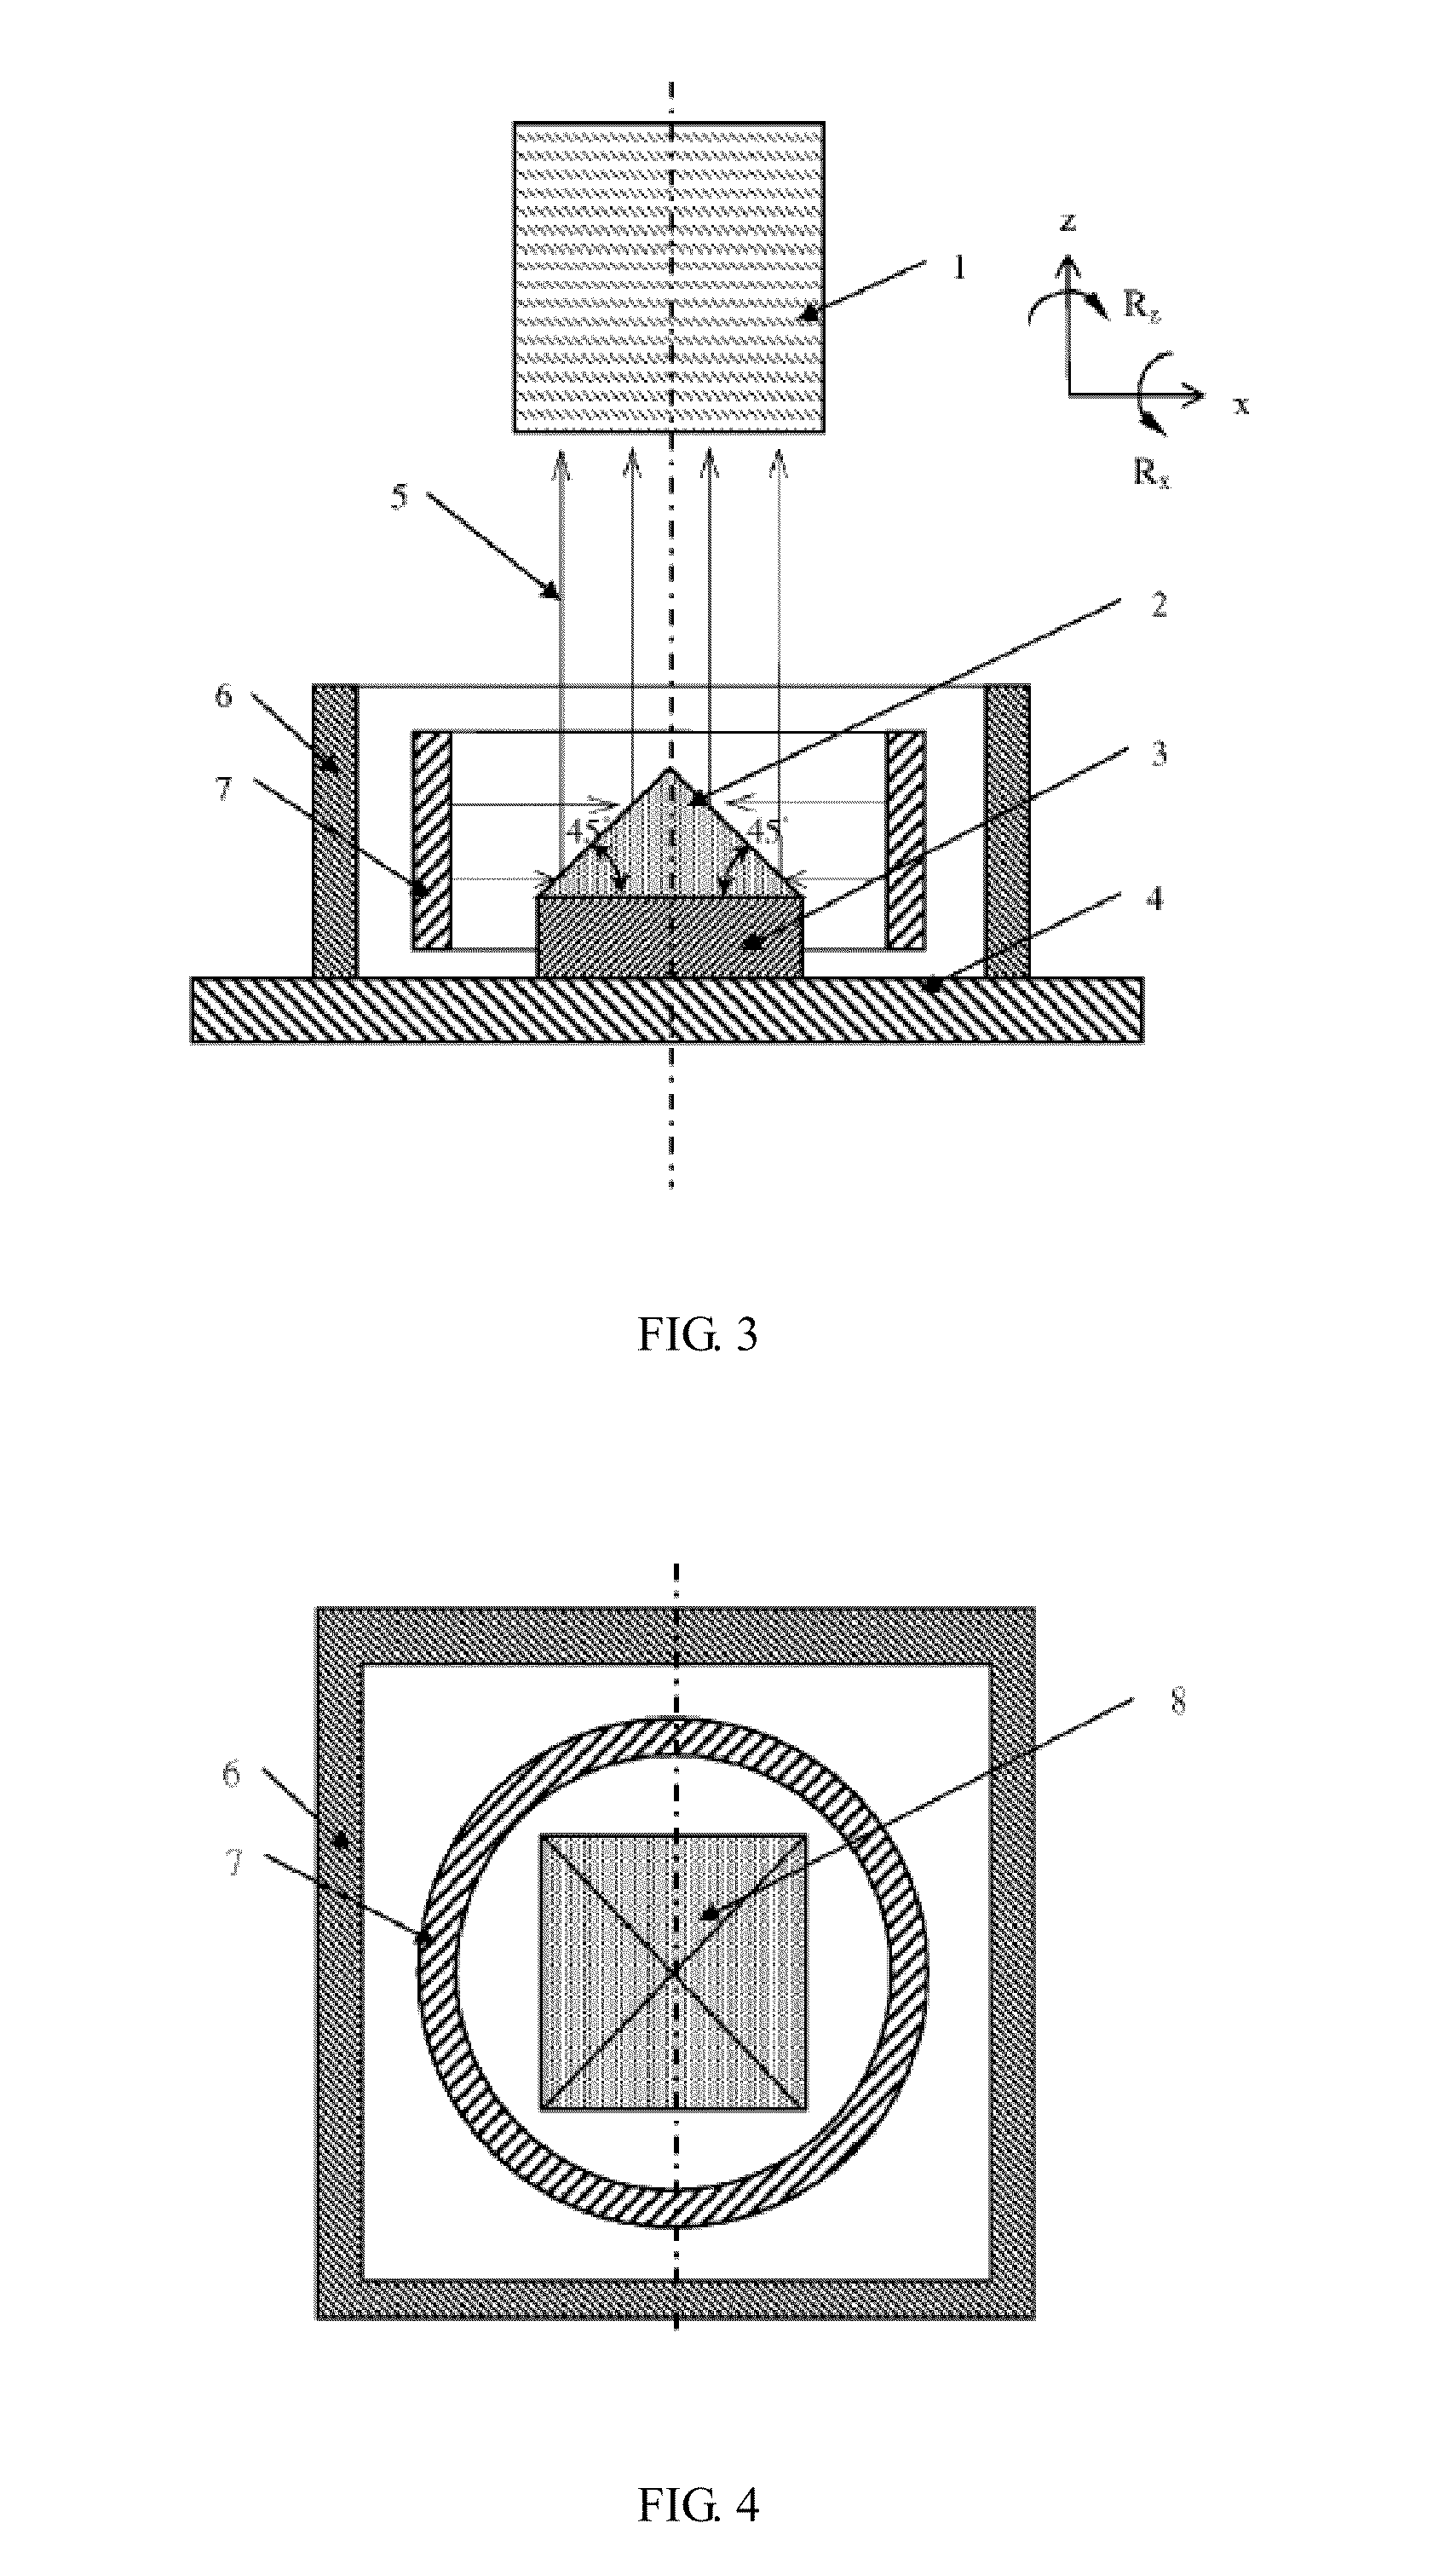 Device, system, and method for rapidly and comprehensively inspecting lens actuator